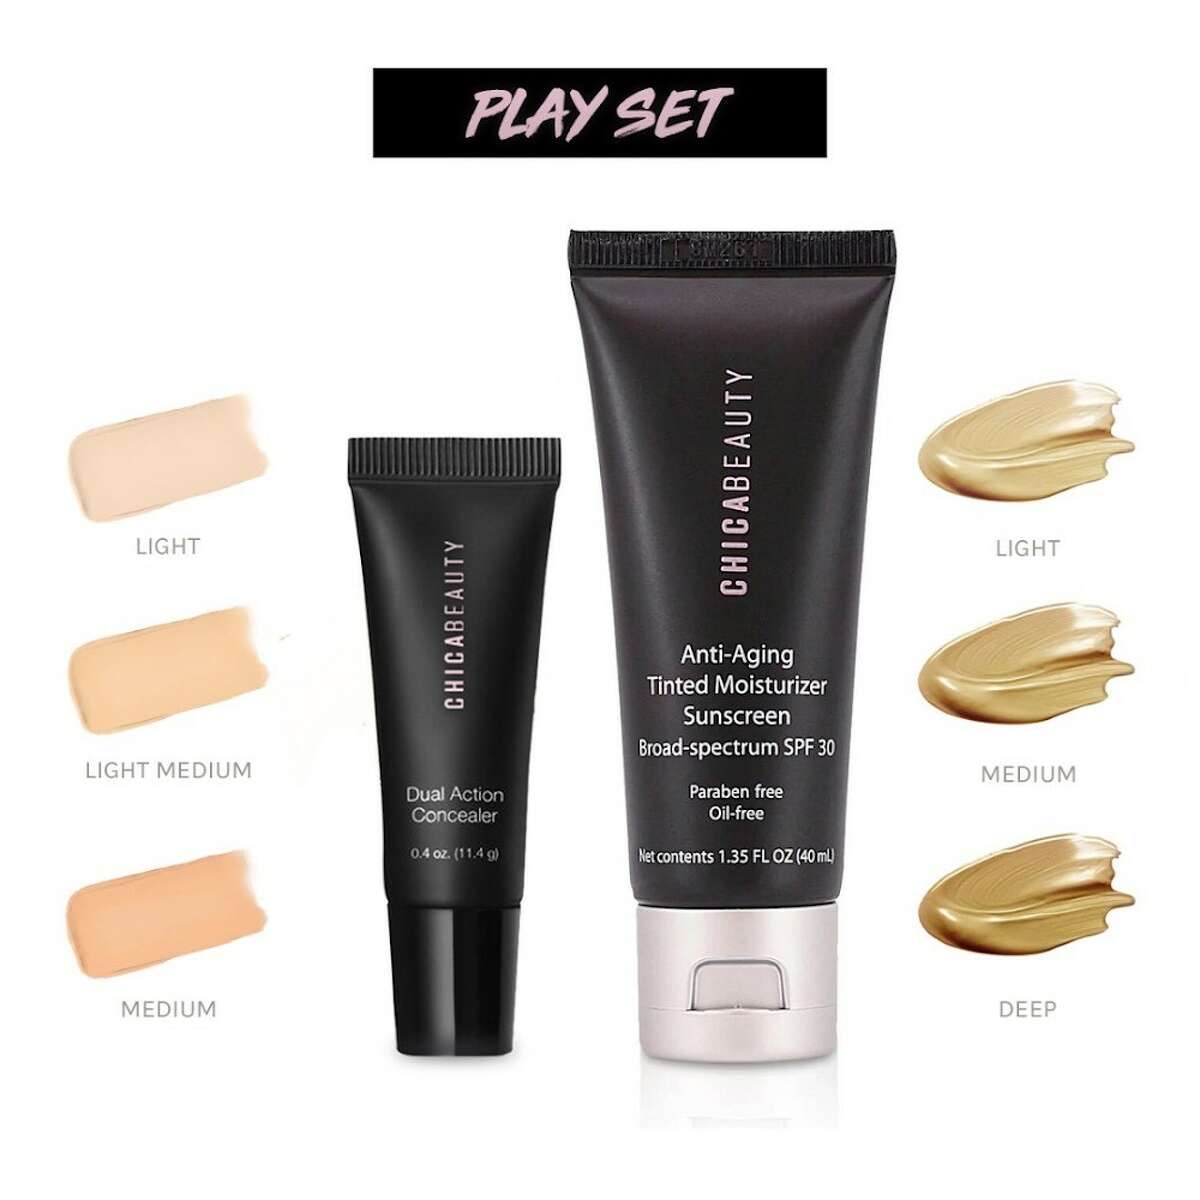 The San Antonio-based cosmetics line, Chica Beauty, offers special makeup sets such as the Play Set ($45), which includes a dual action concealer and 3-in-1 anti-aging tinted moisturizer sunscreen.